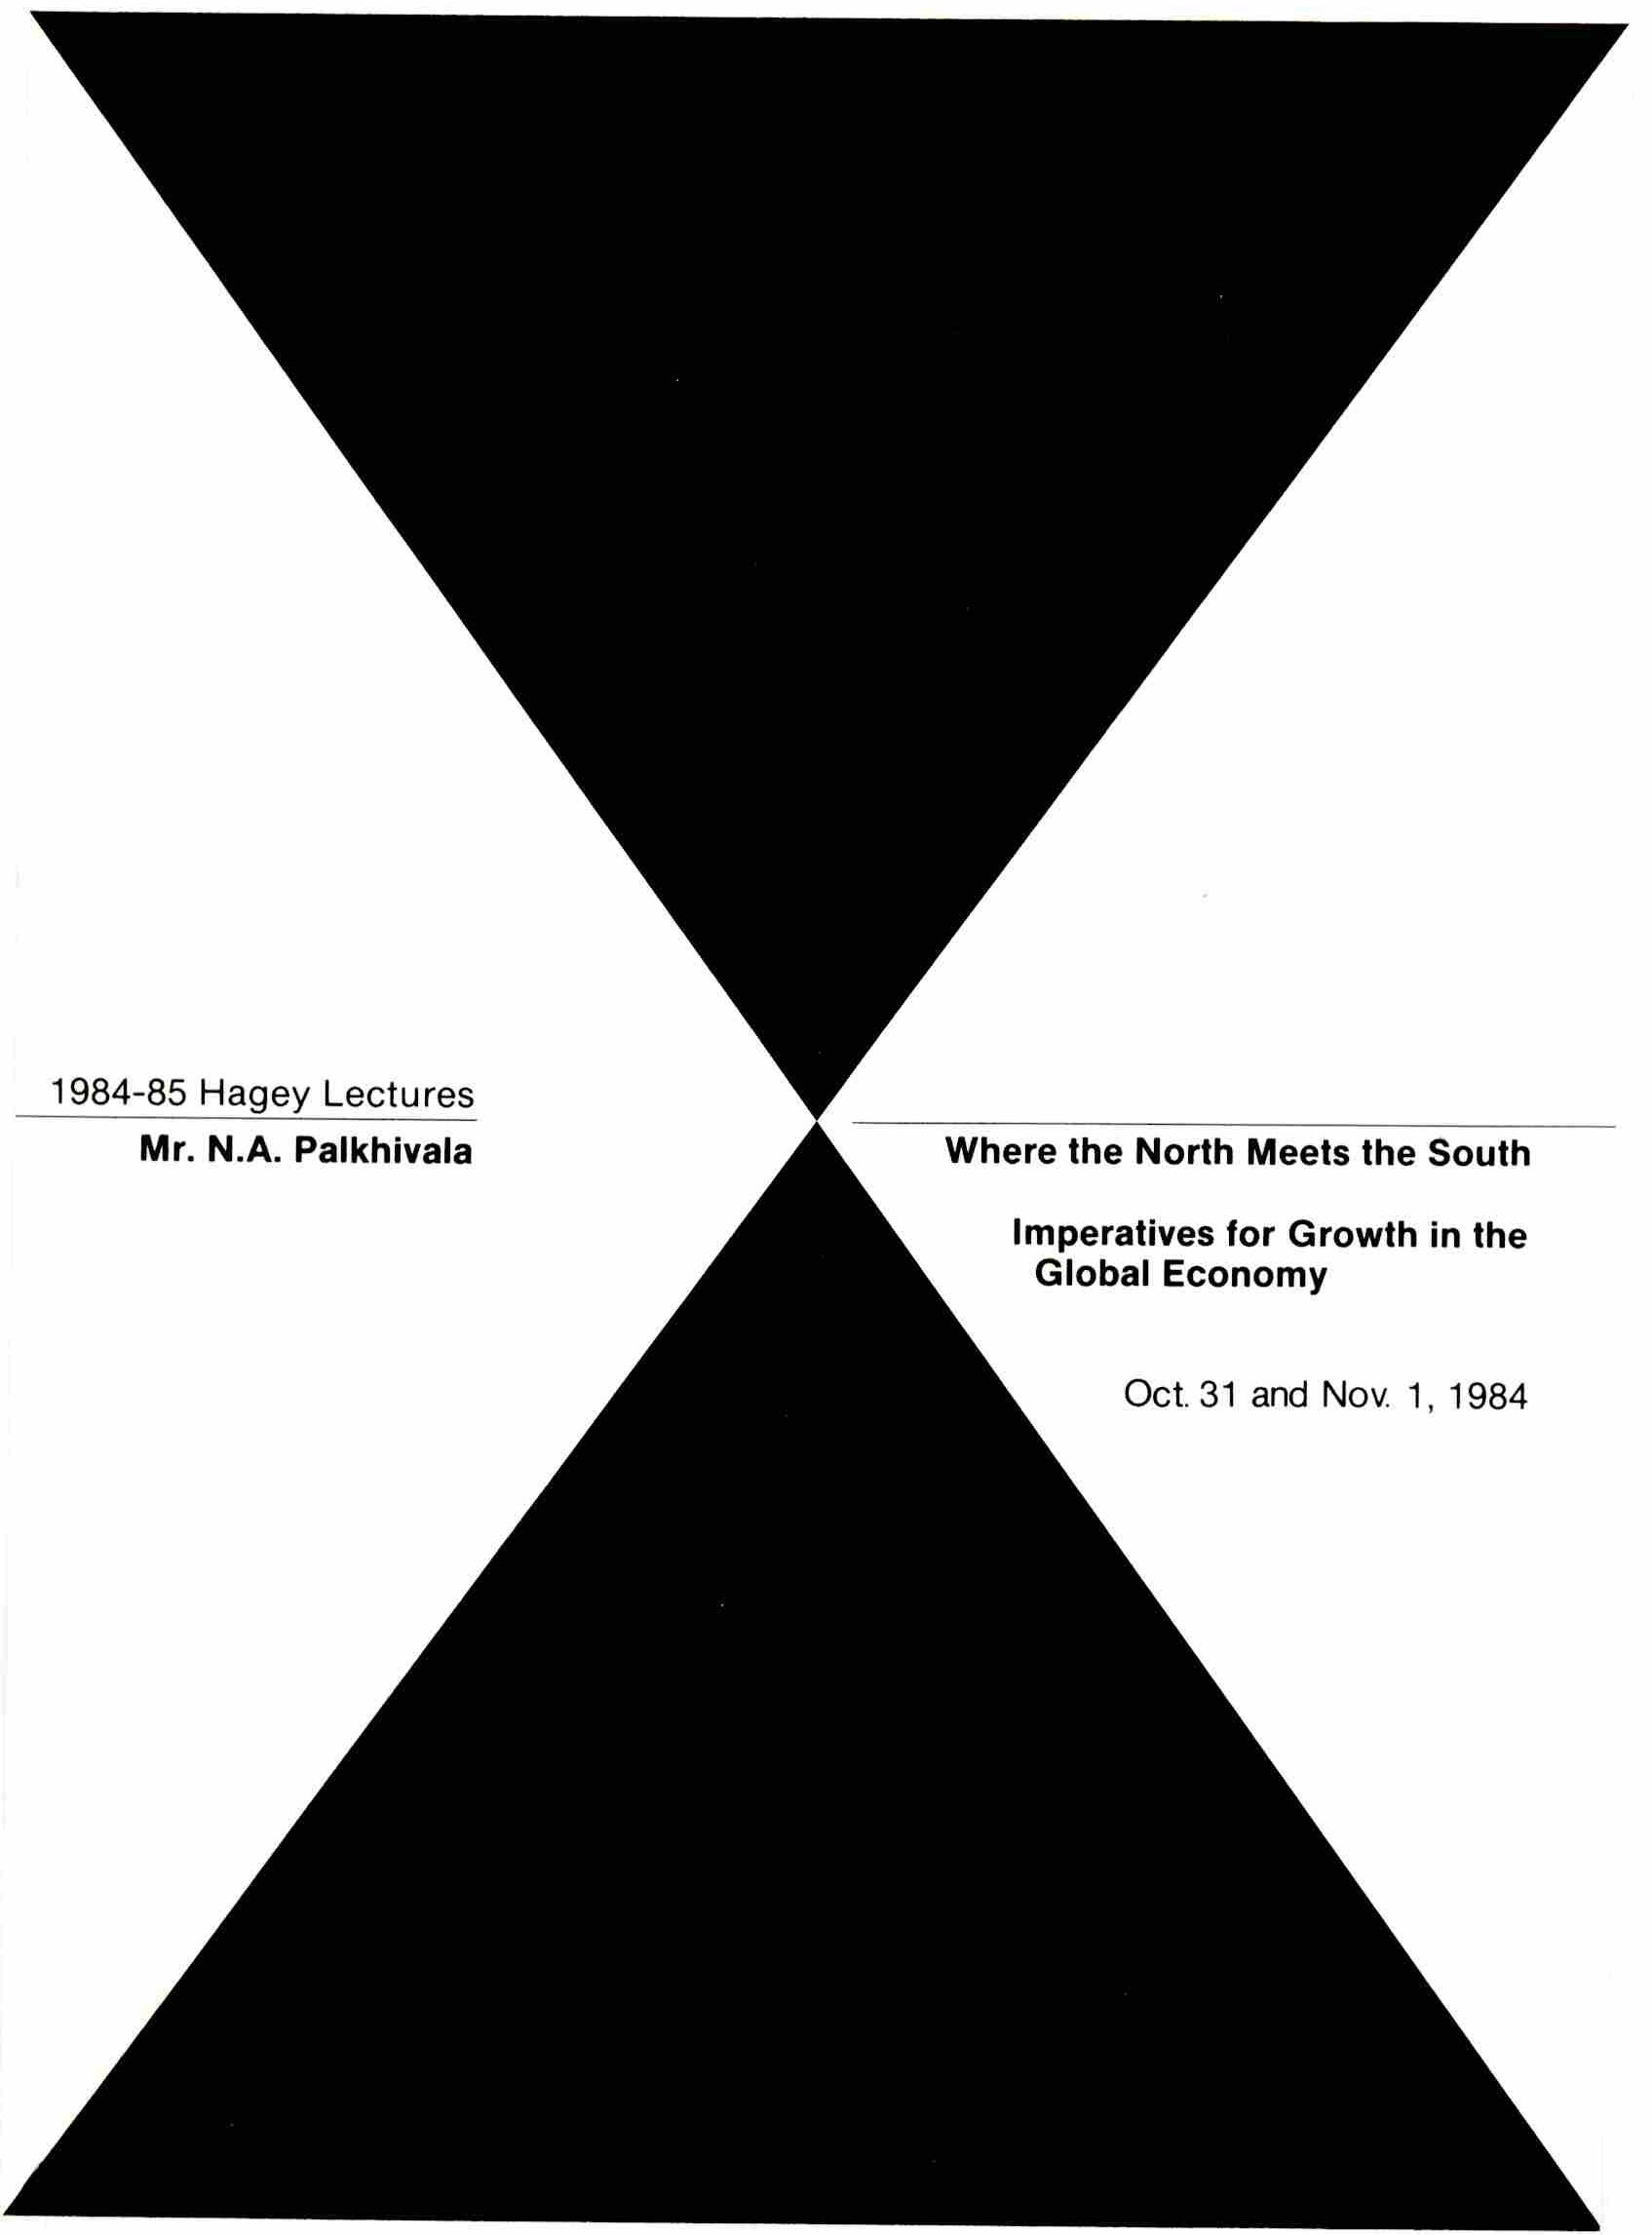 Poster for 1984 Hagey Lecture